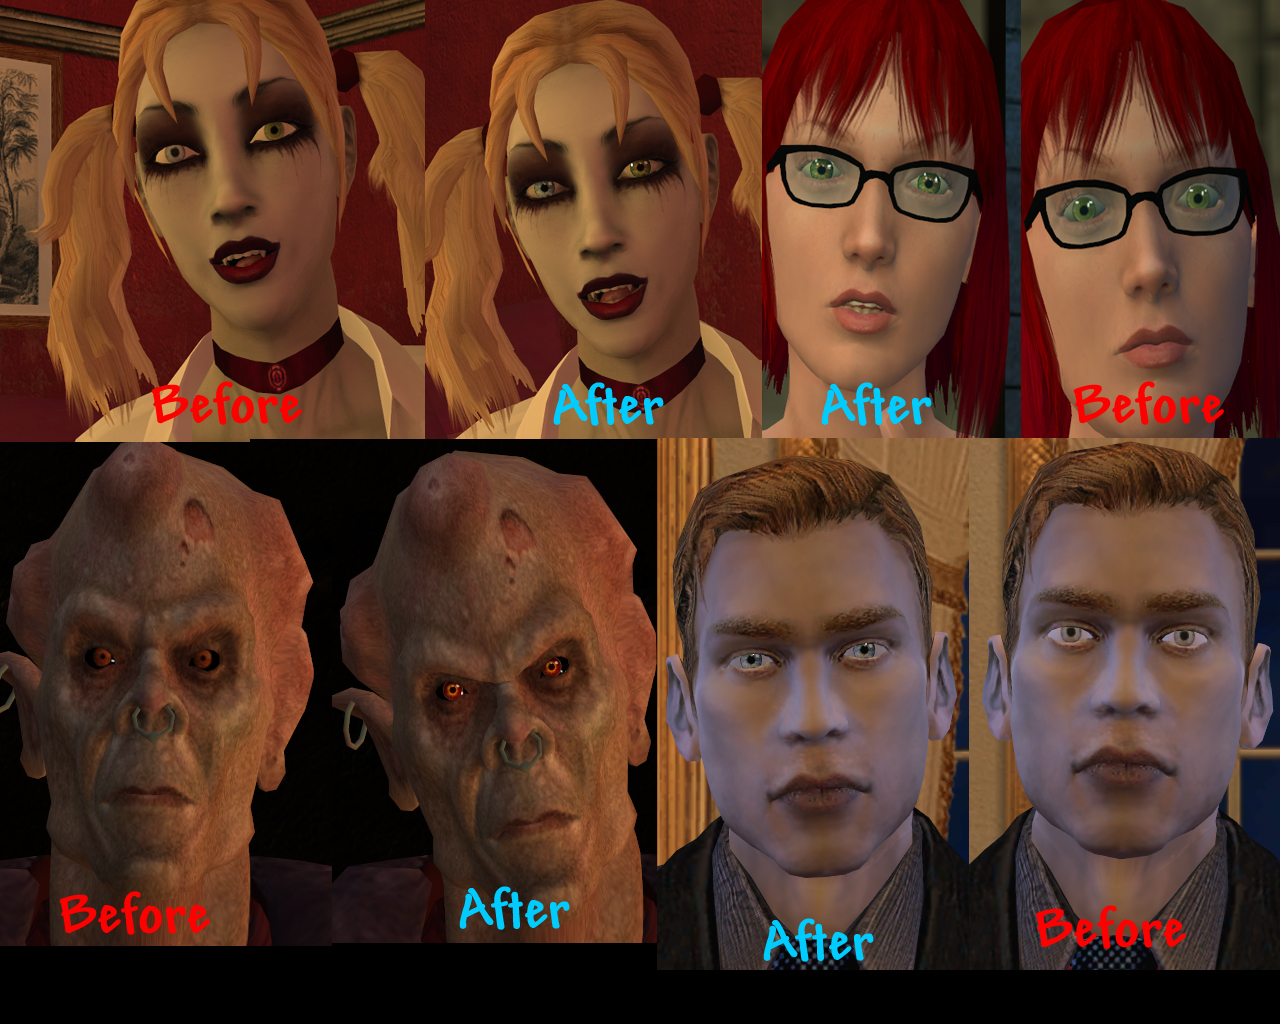 Vampire The Masquerade Bloodlines basic or plus unofficial patch? : r/vtmb